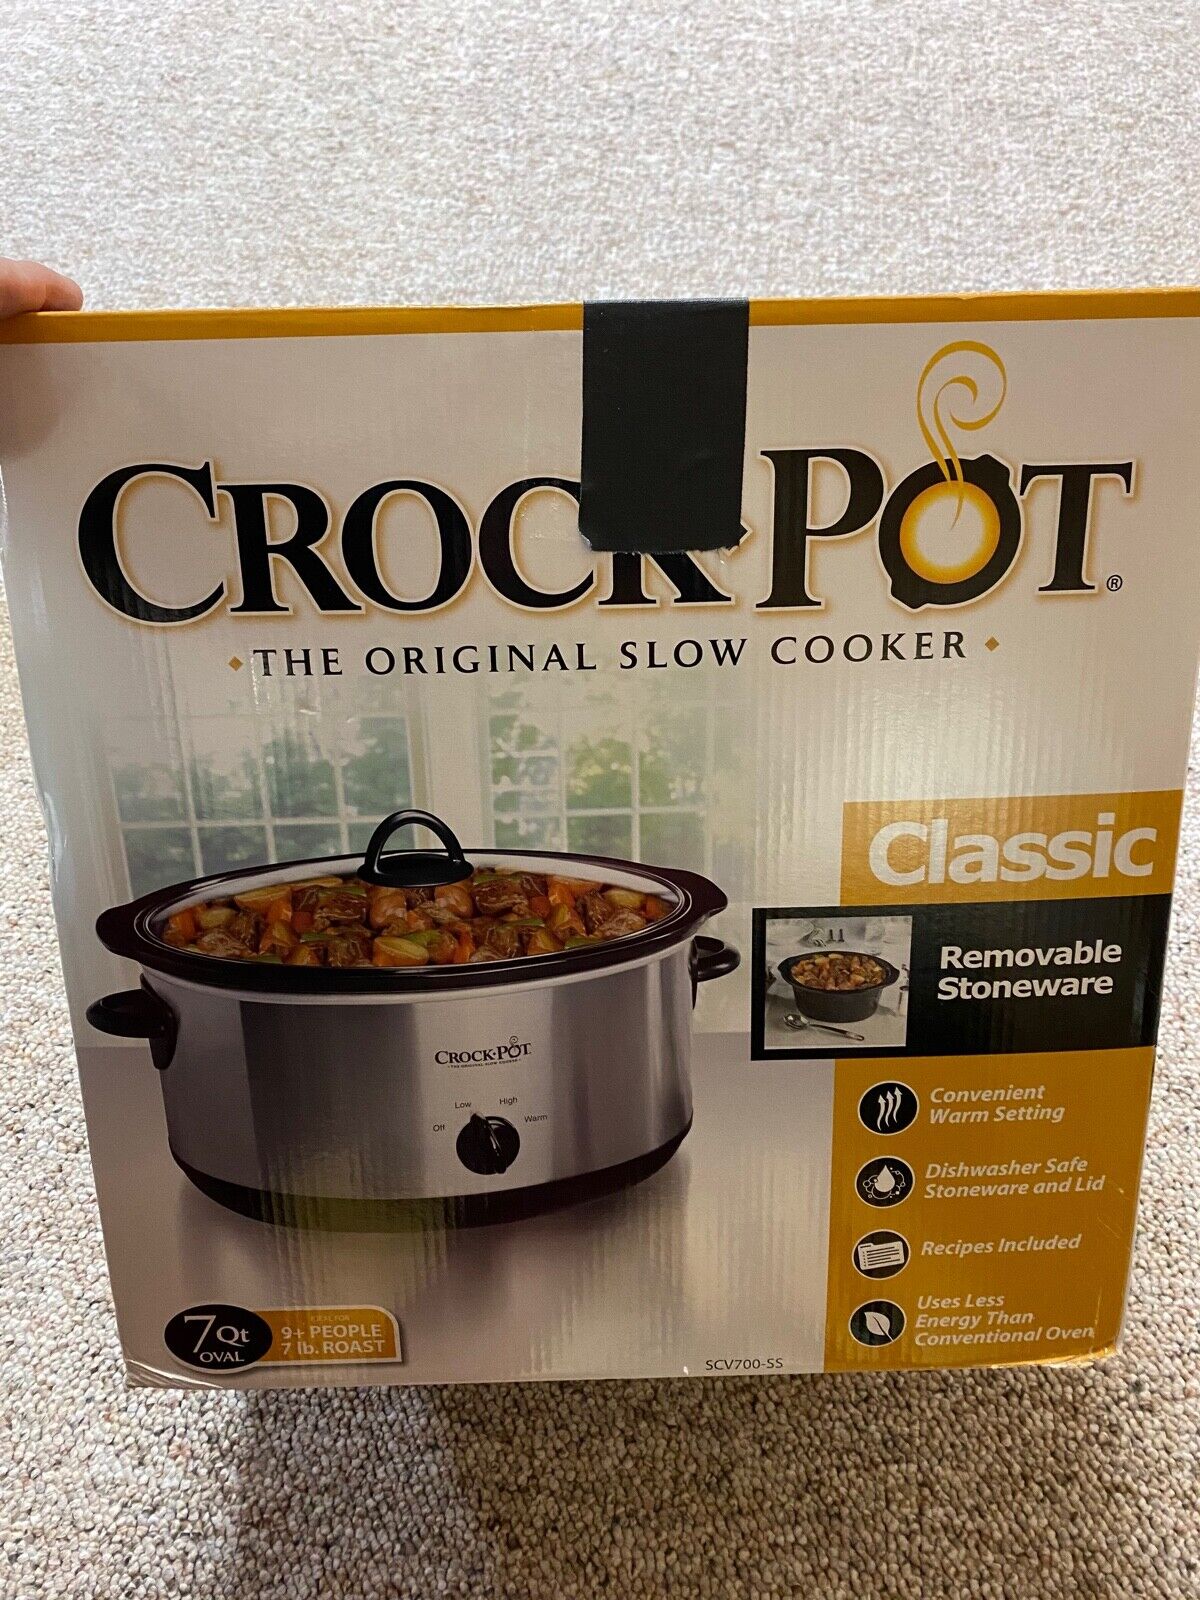 7-Qt Stainless Steel Oval Slow Cooker